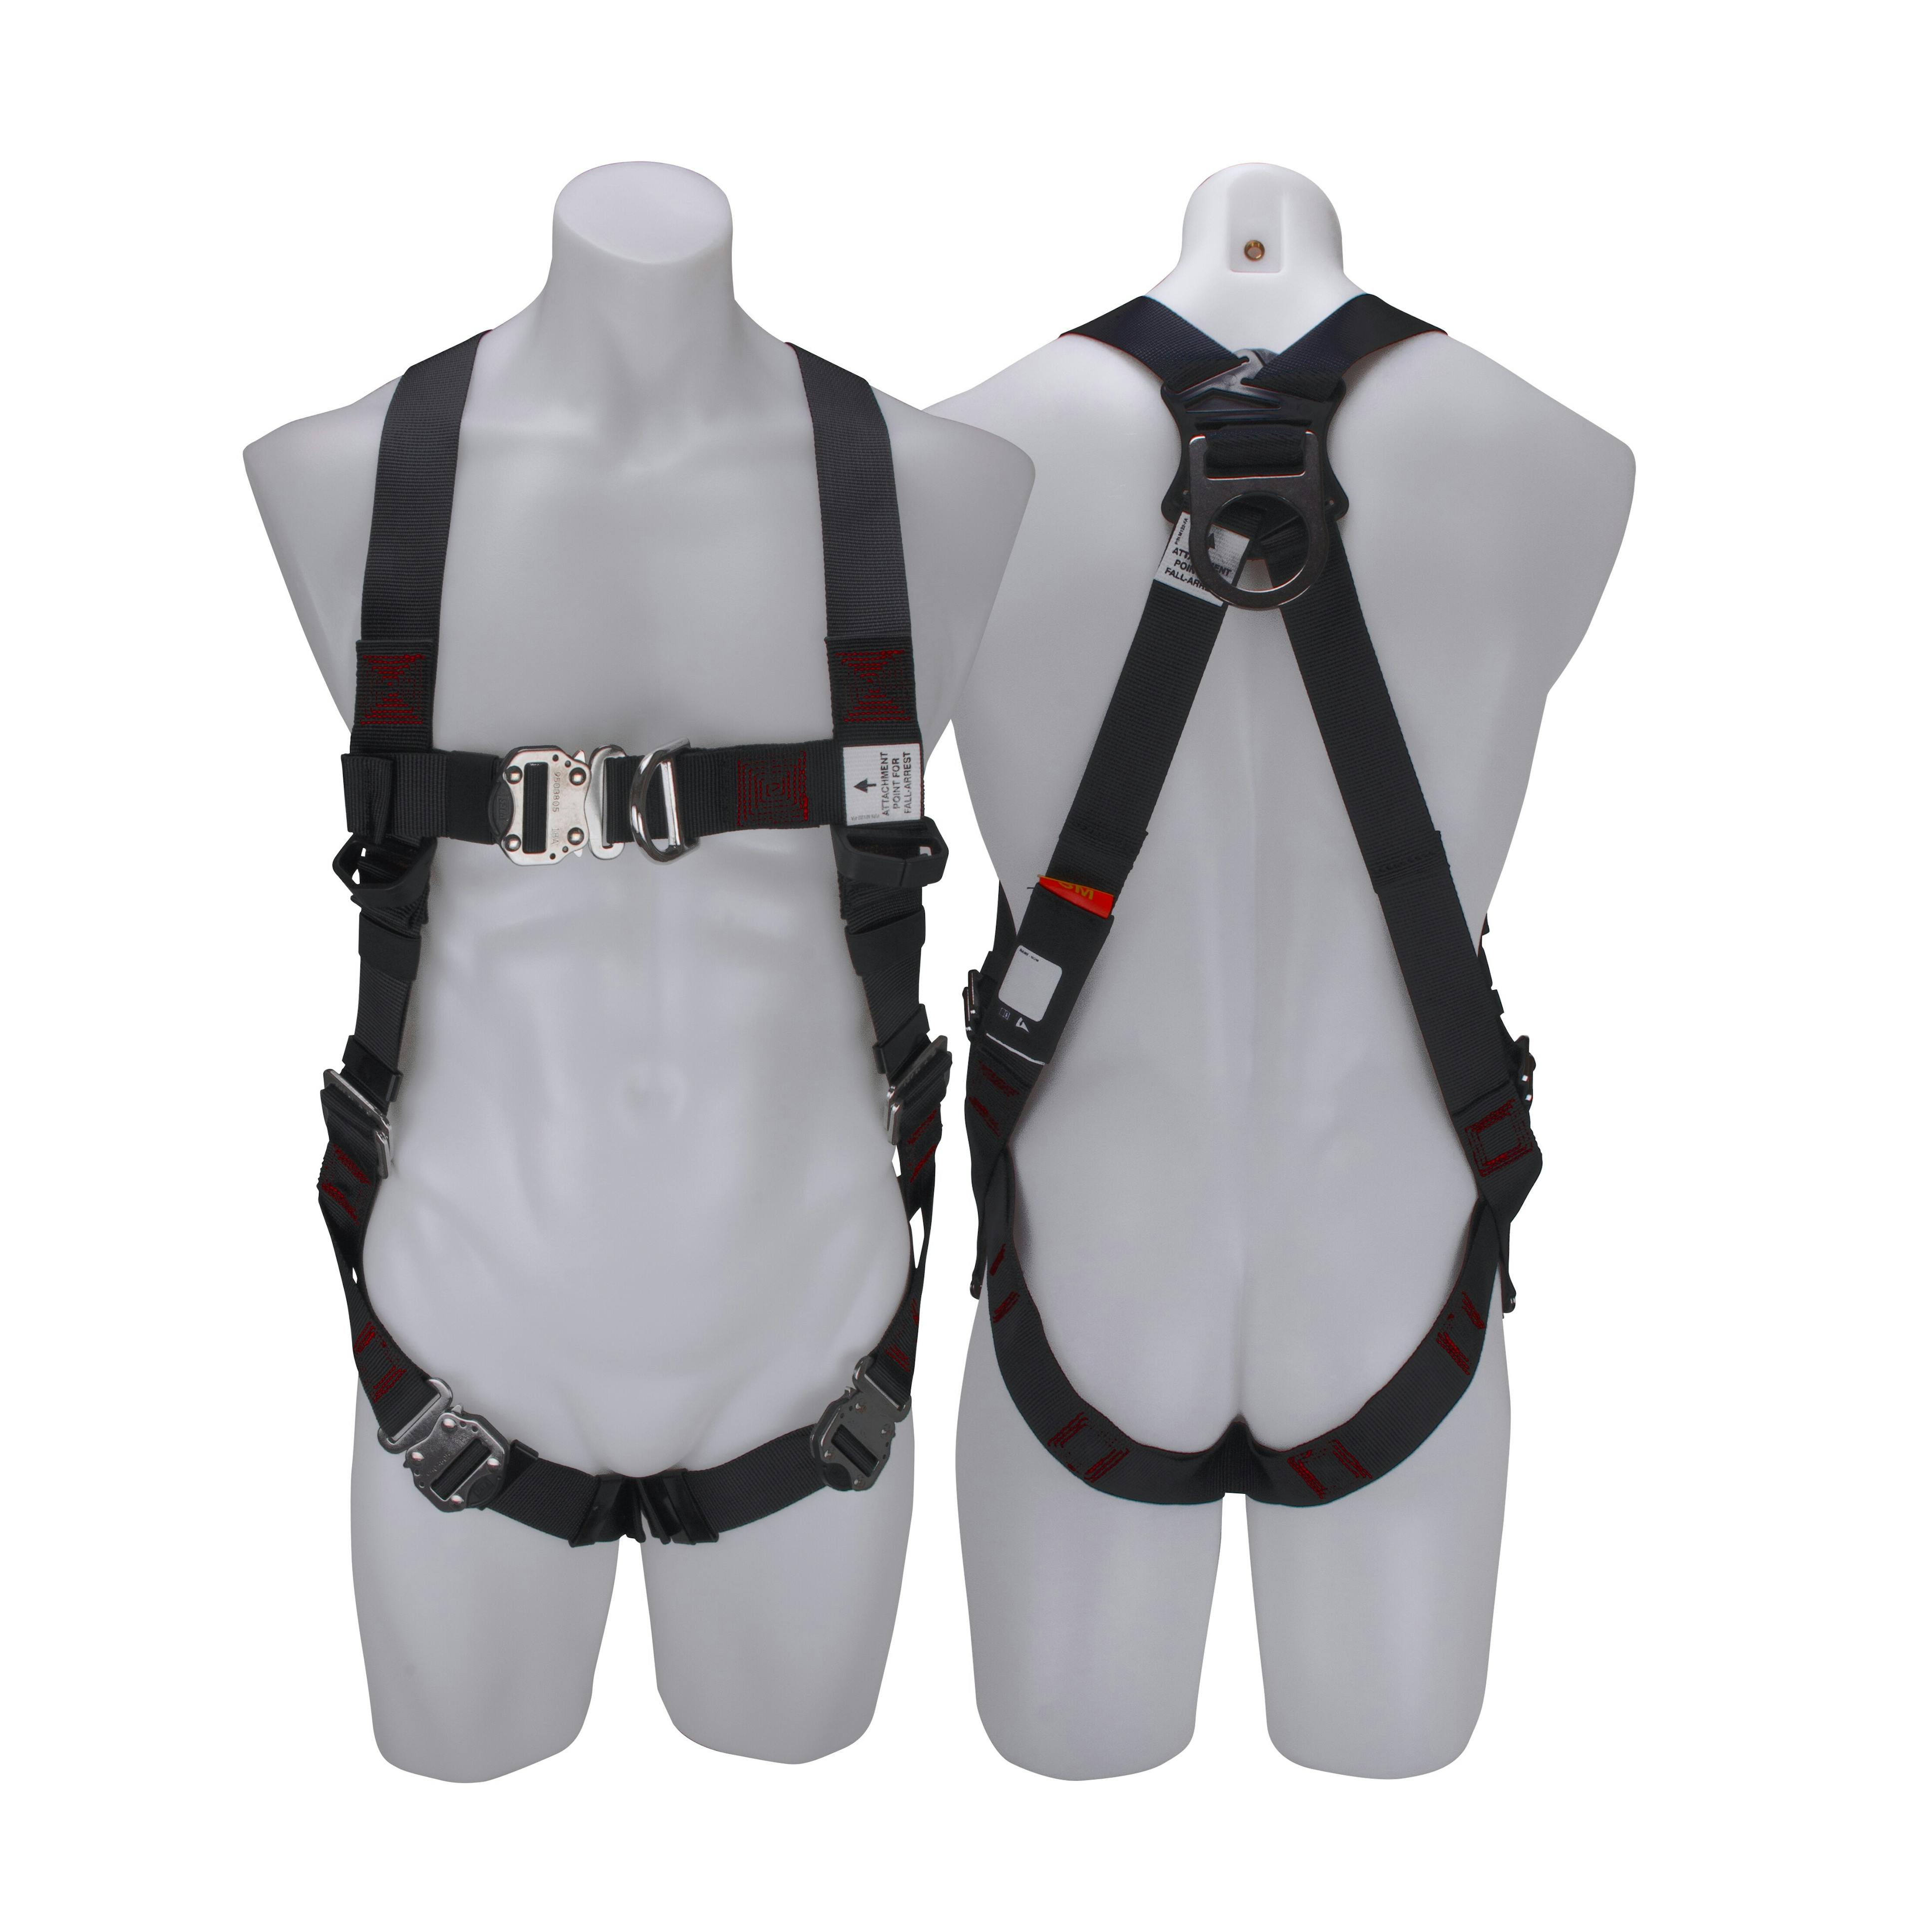 3M™ PROTECTA® X Riggers Harness with Stainless Steel 1161666, Red and Black, Large, 1 EA/Case